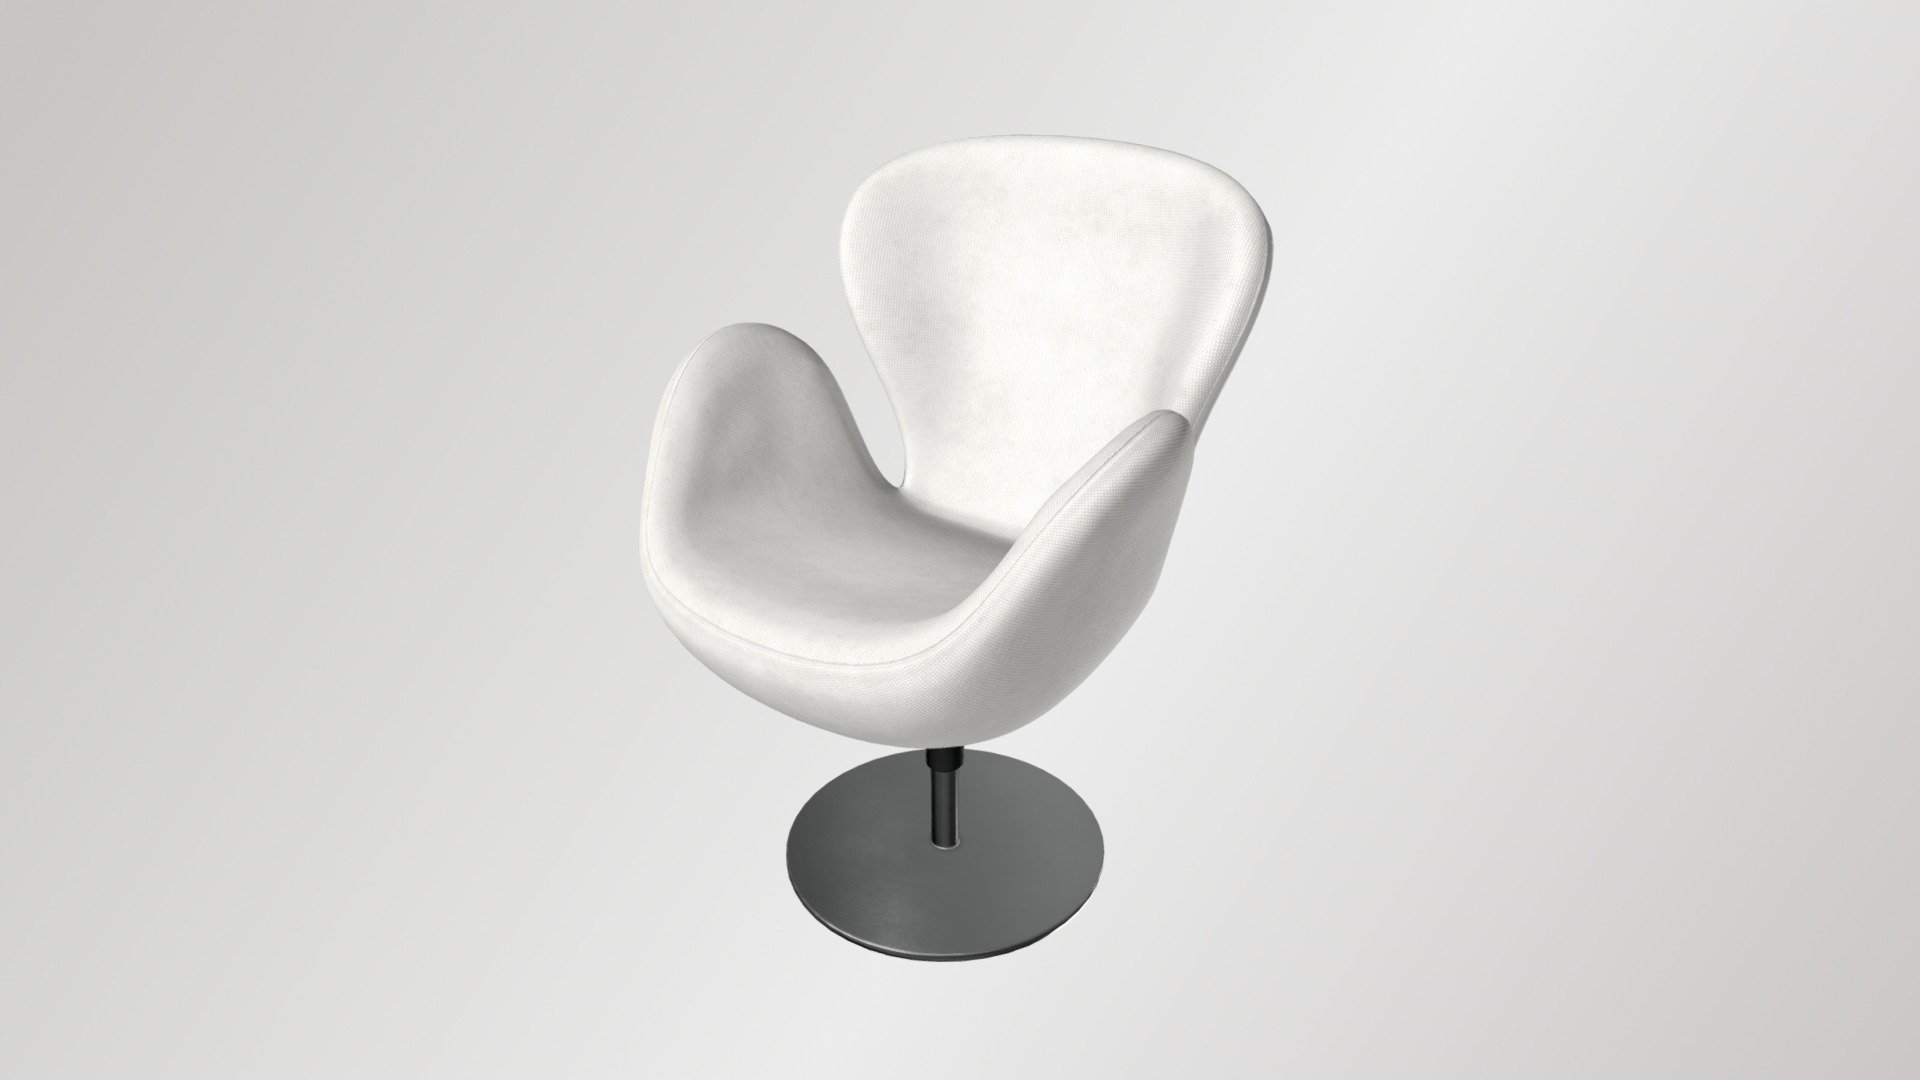 White Futuristic Swan Chair with unique design

Triangles count: 13,048

High-poly and low-poly versions are included

Ready for Virtual Reality (VR), Augmented Reality (AR), metaverses, 3D tours, games and other real-time apps, as well as for advertising and commercial, etc.




x0, y0, z0

Clean UV 

Game-ready

Real-world size

Clear naming

Fully textured with all materials applied

PBR

Textures:




All materials and textures are included in the Textures folder

4k, 2k, 1k

1k, 2k: Albedo, Roughness, Metallic, ORM in JPEG; Normal in PNG

4k: all in PNG

Normal map type: OpenGL

Formats:
High-poly model:




FBX with packed textures

OBJ + MTL

blend

Low-poly model:




FBX with packed textures

OBJ + MTL

GLB + USDZ

blend with 4k textures for FBX and OBJ

blend with 2k textures for GLB

If you experience any difficulties while using the models, we will be happy to offer our qualified assistance.

Thank you for choosing our 3D models!

Sincerely yours,

CyberFox team - White Futuristic Chair - Swan Chair - Buy Royalty Free 3D model by CyberFox 3D Studio (@cyberfox3d) 3d model